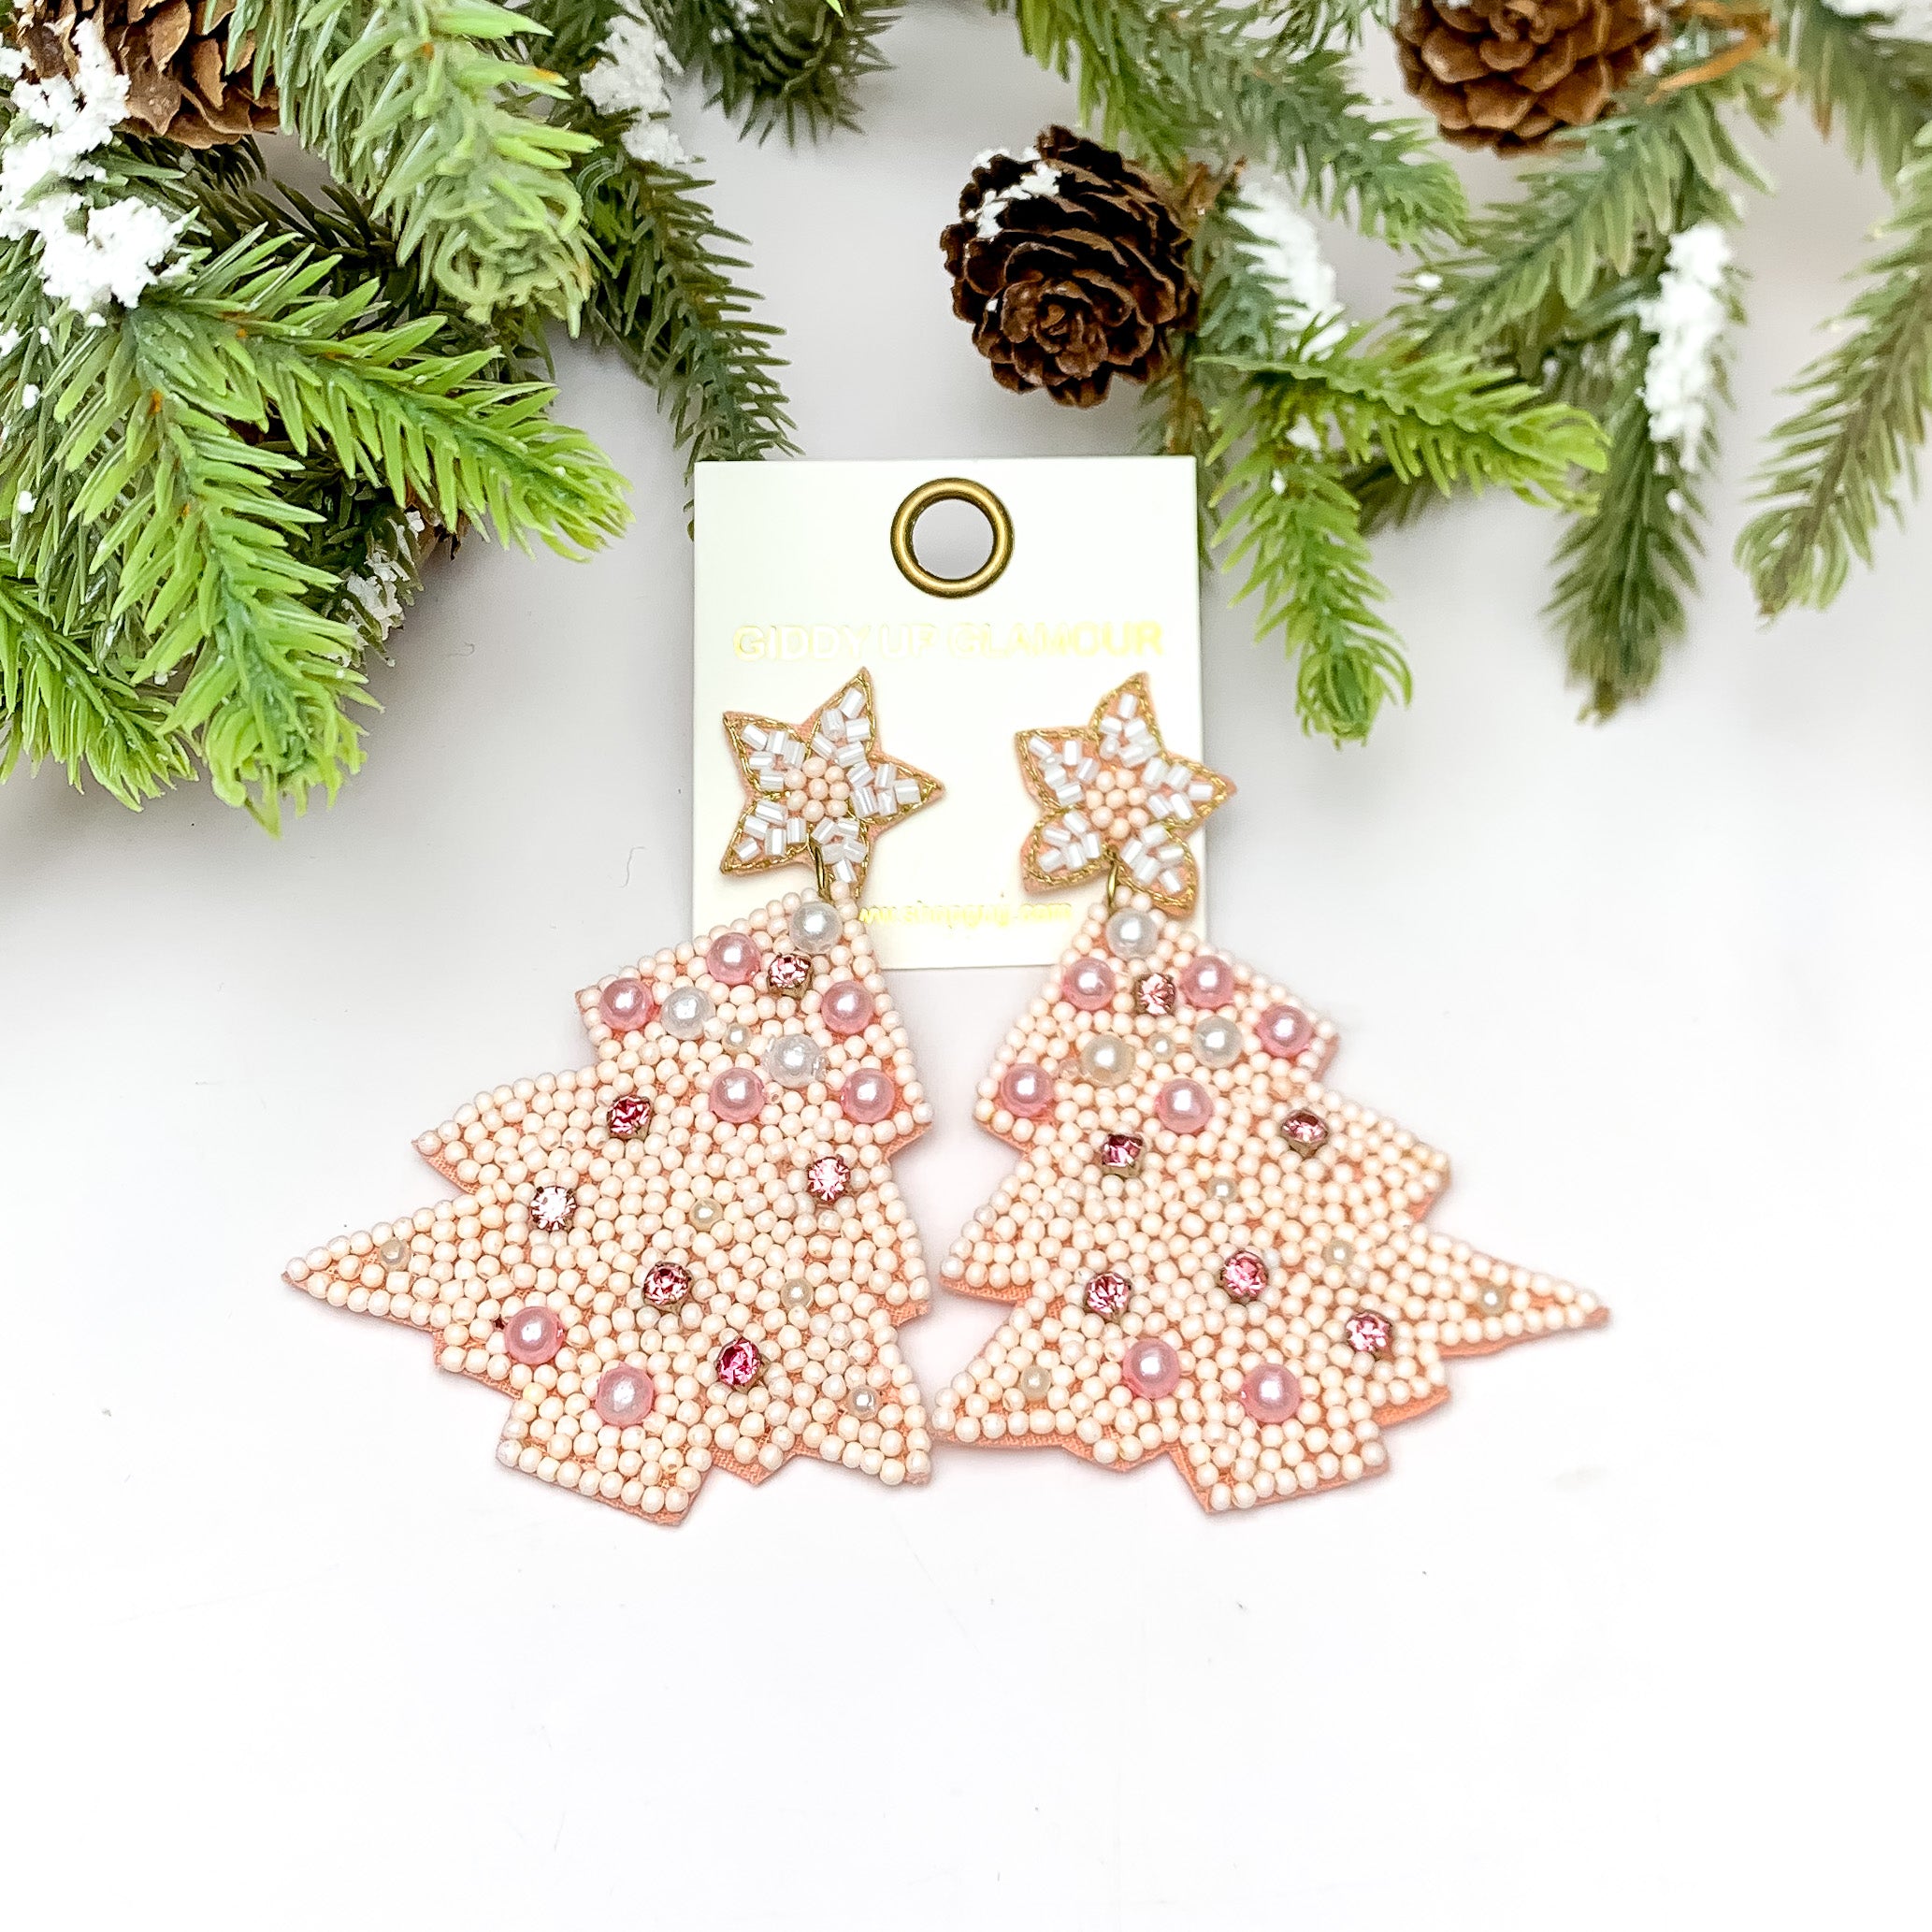 Pink Holidays Beaded Christmas Tree Earrings With Pearls. These earrings are pictured on a white background with a tree and pine cones at the top.